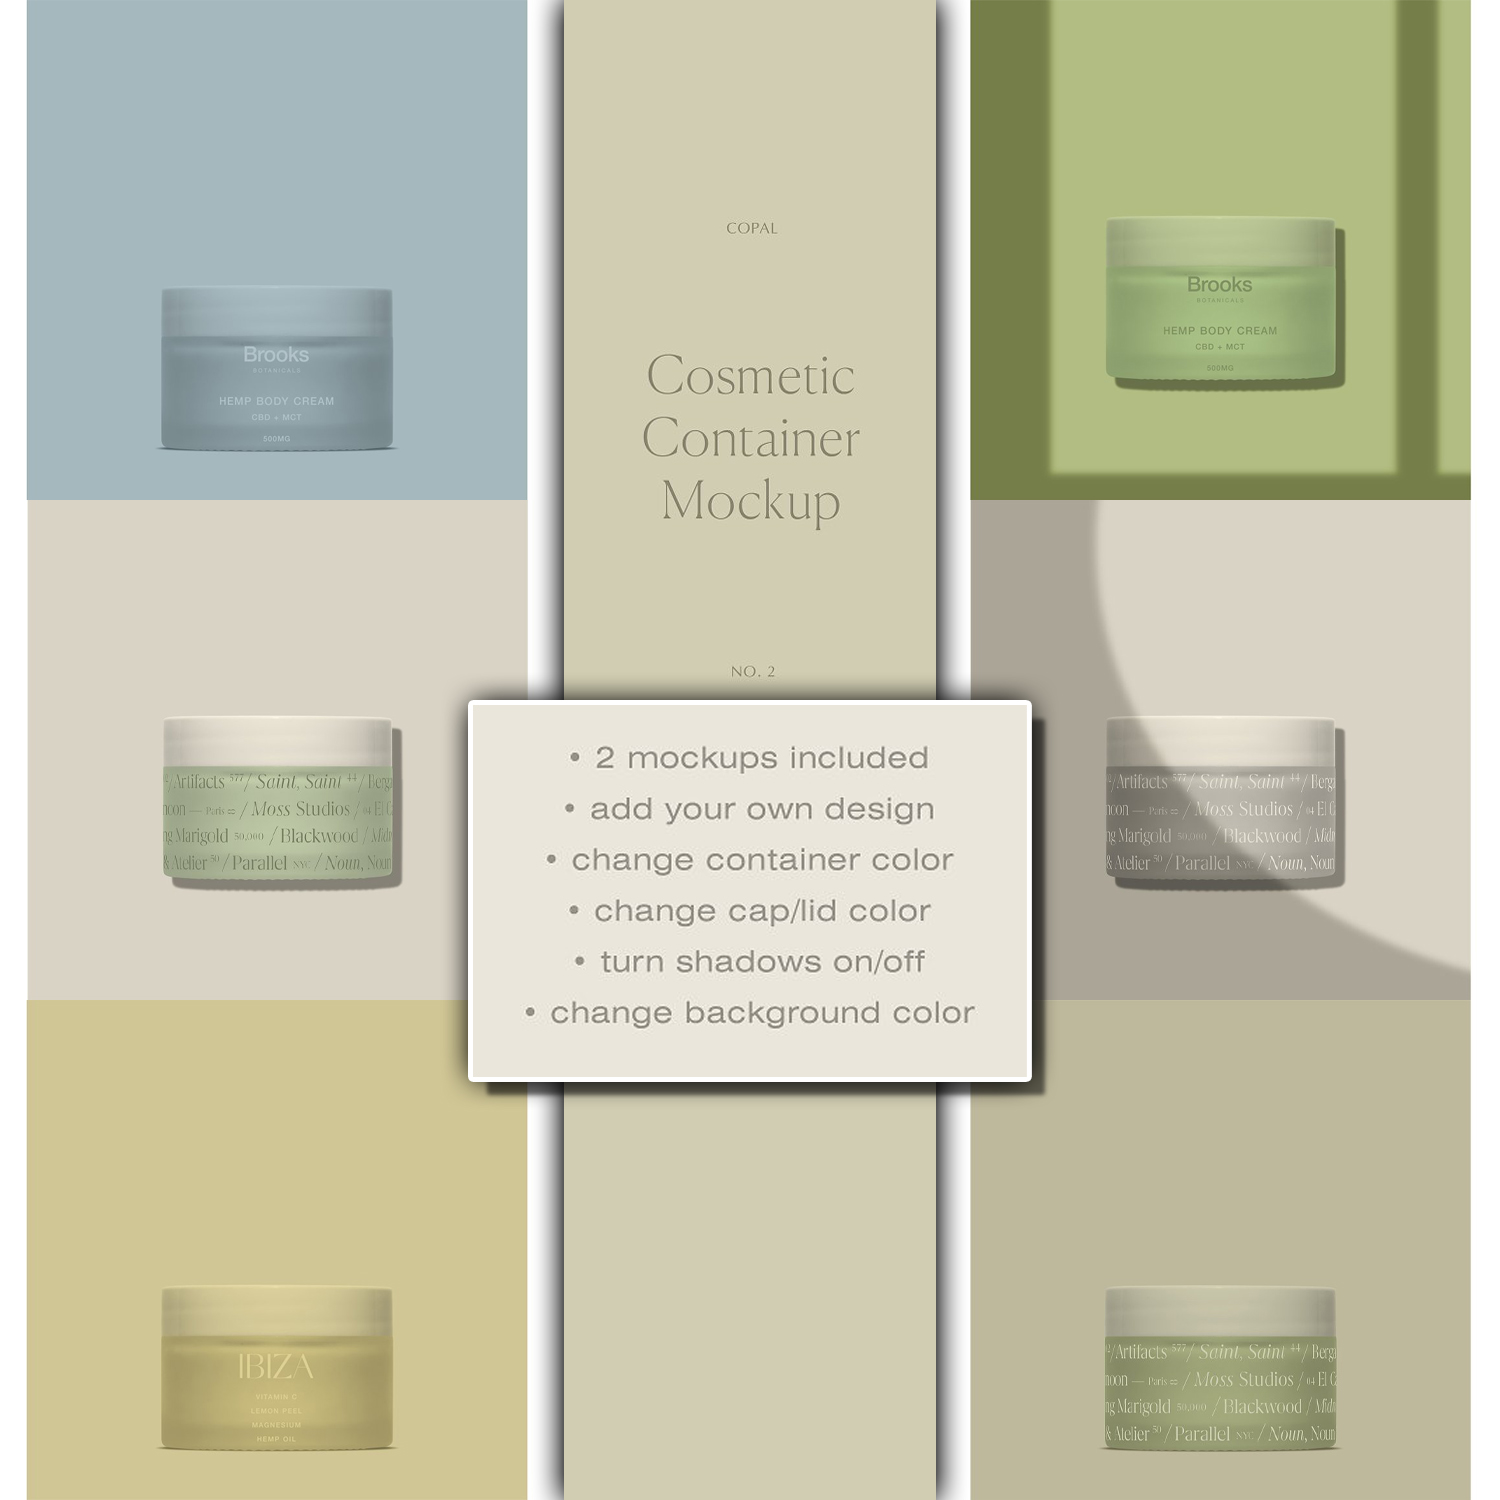 Prints of cosmetic container mockup.